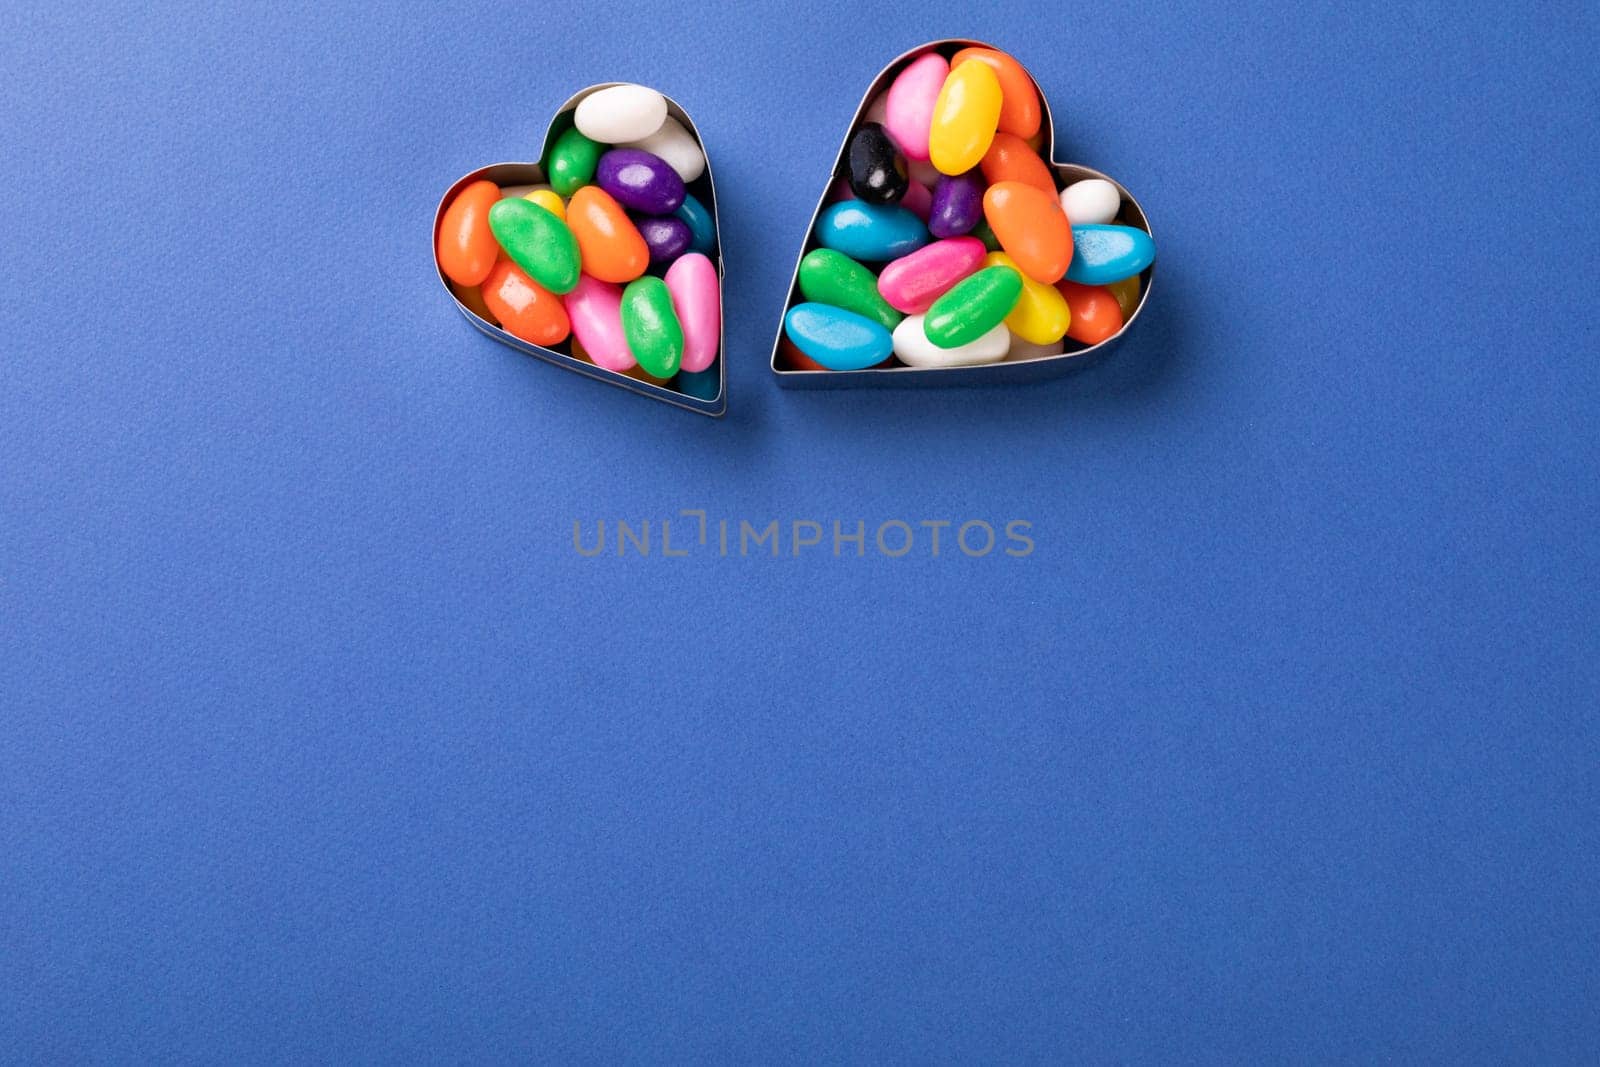 Directly above view of colorful candies in heart shape containers over copy space on blue background. unaltered, sweet food and unhealthy eating concept.